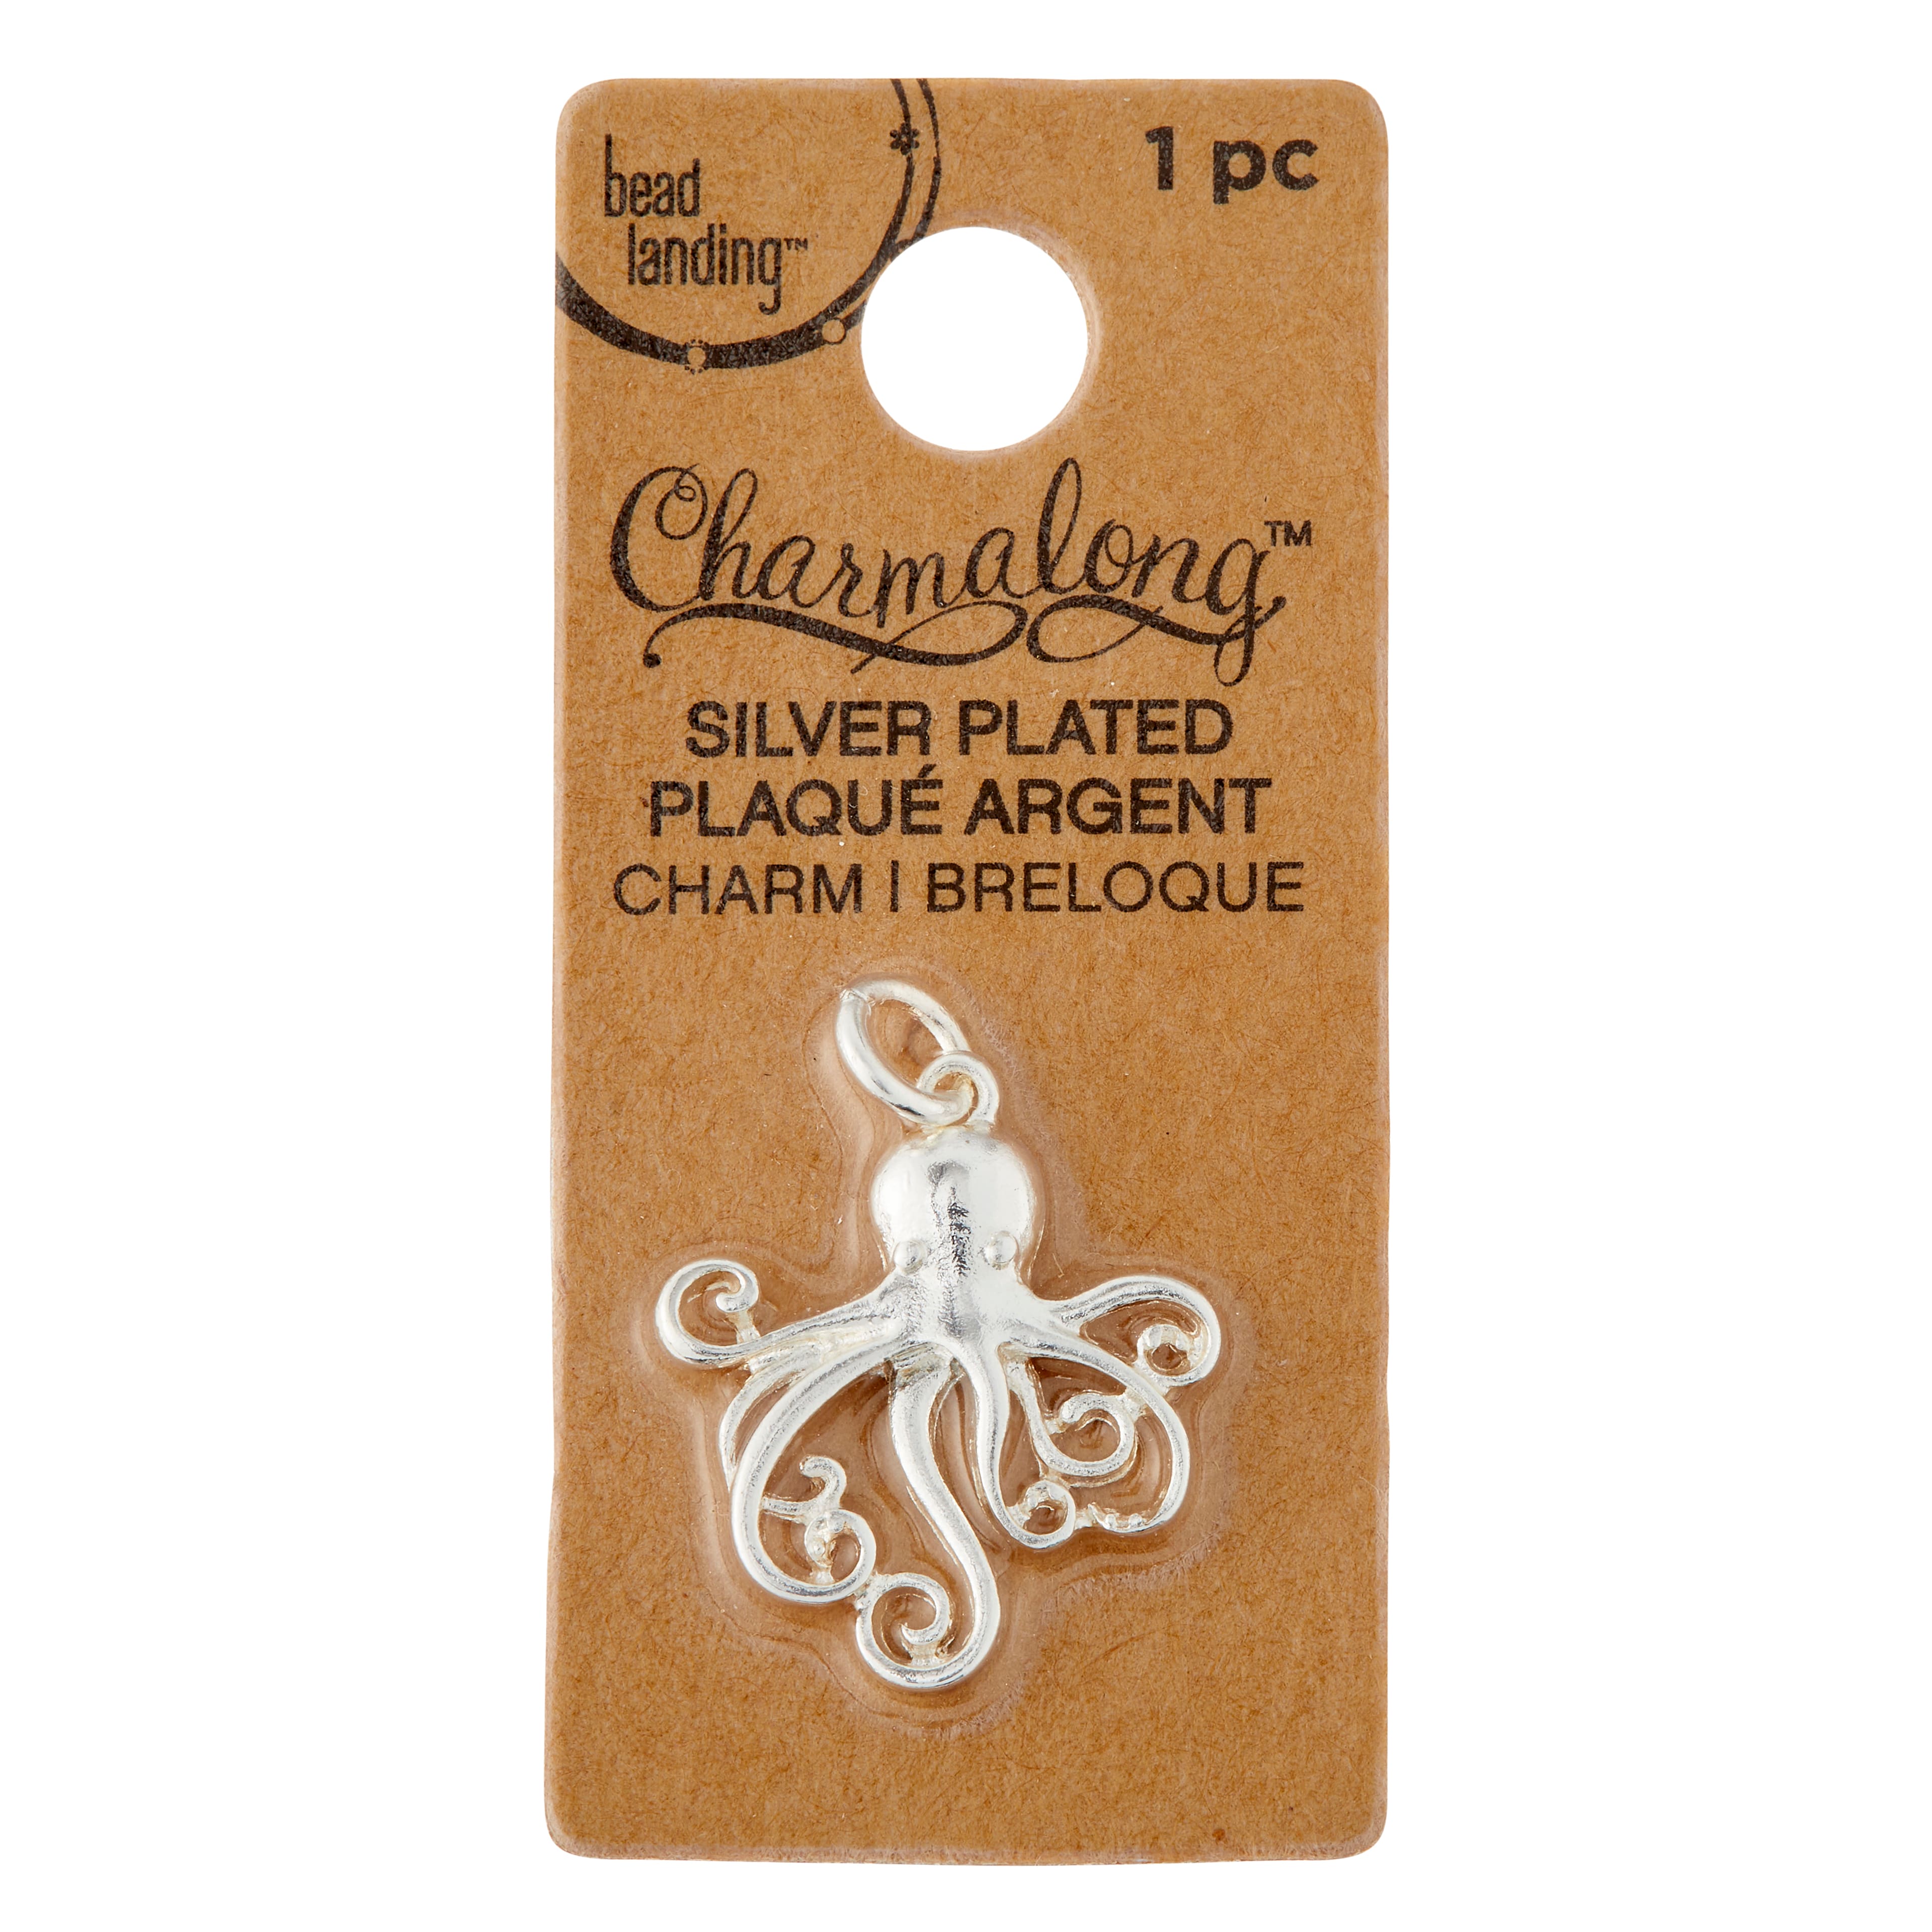 12 Pack: Charmalong™ Silver Plated Octopus Charm by Bead Landing™